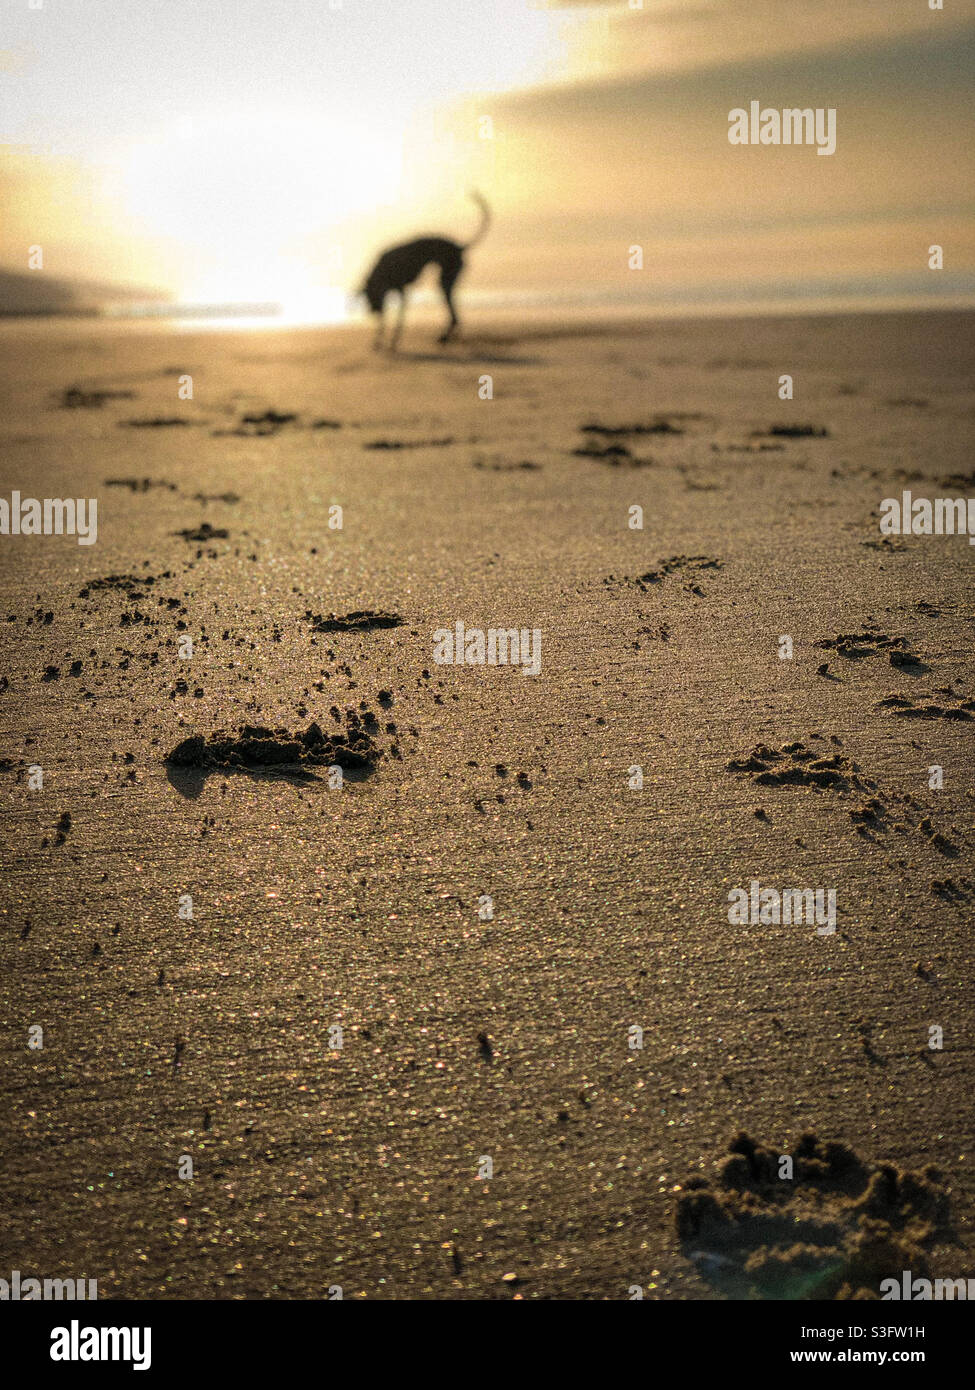 Paw prints in sand Stock Photo